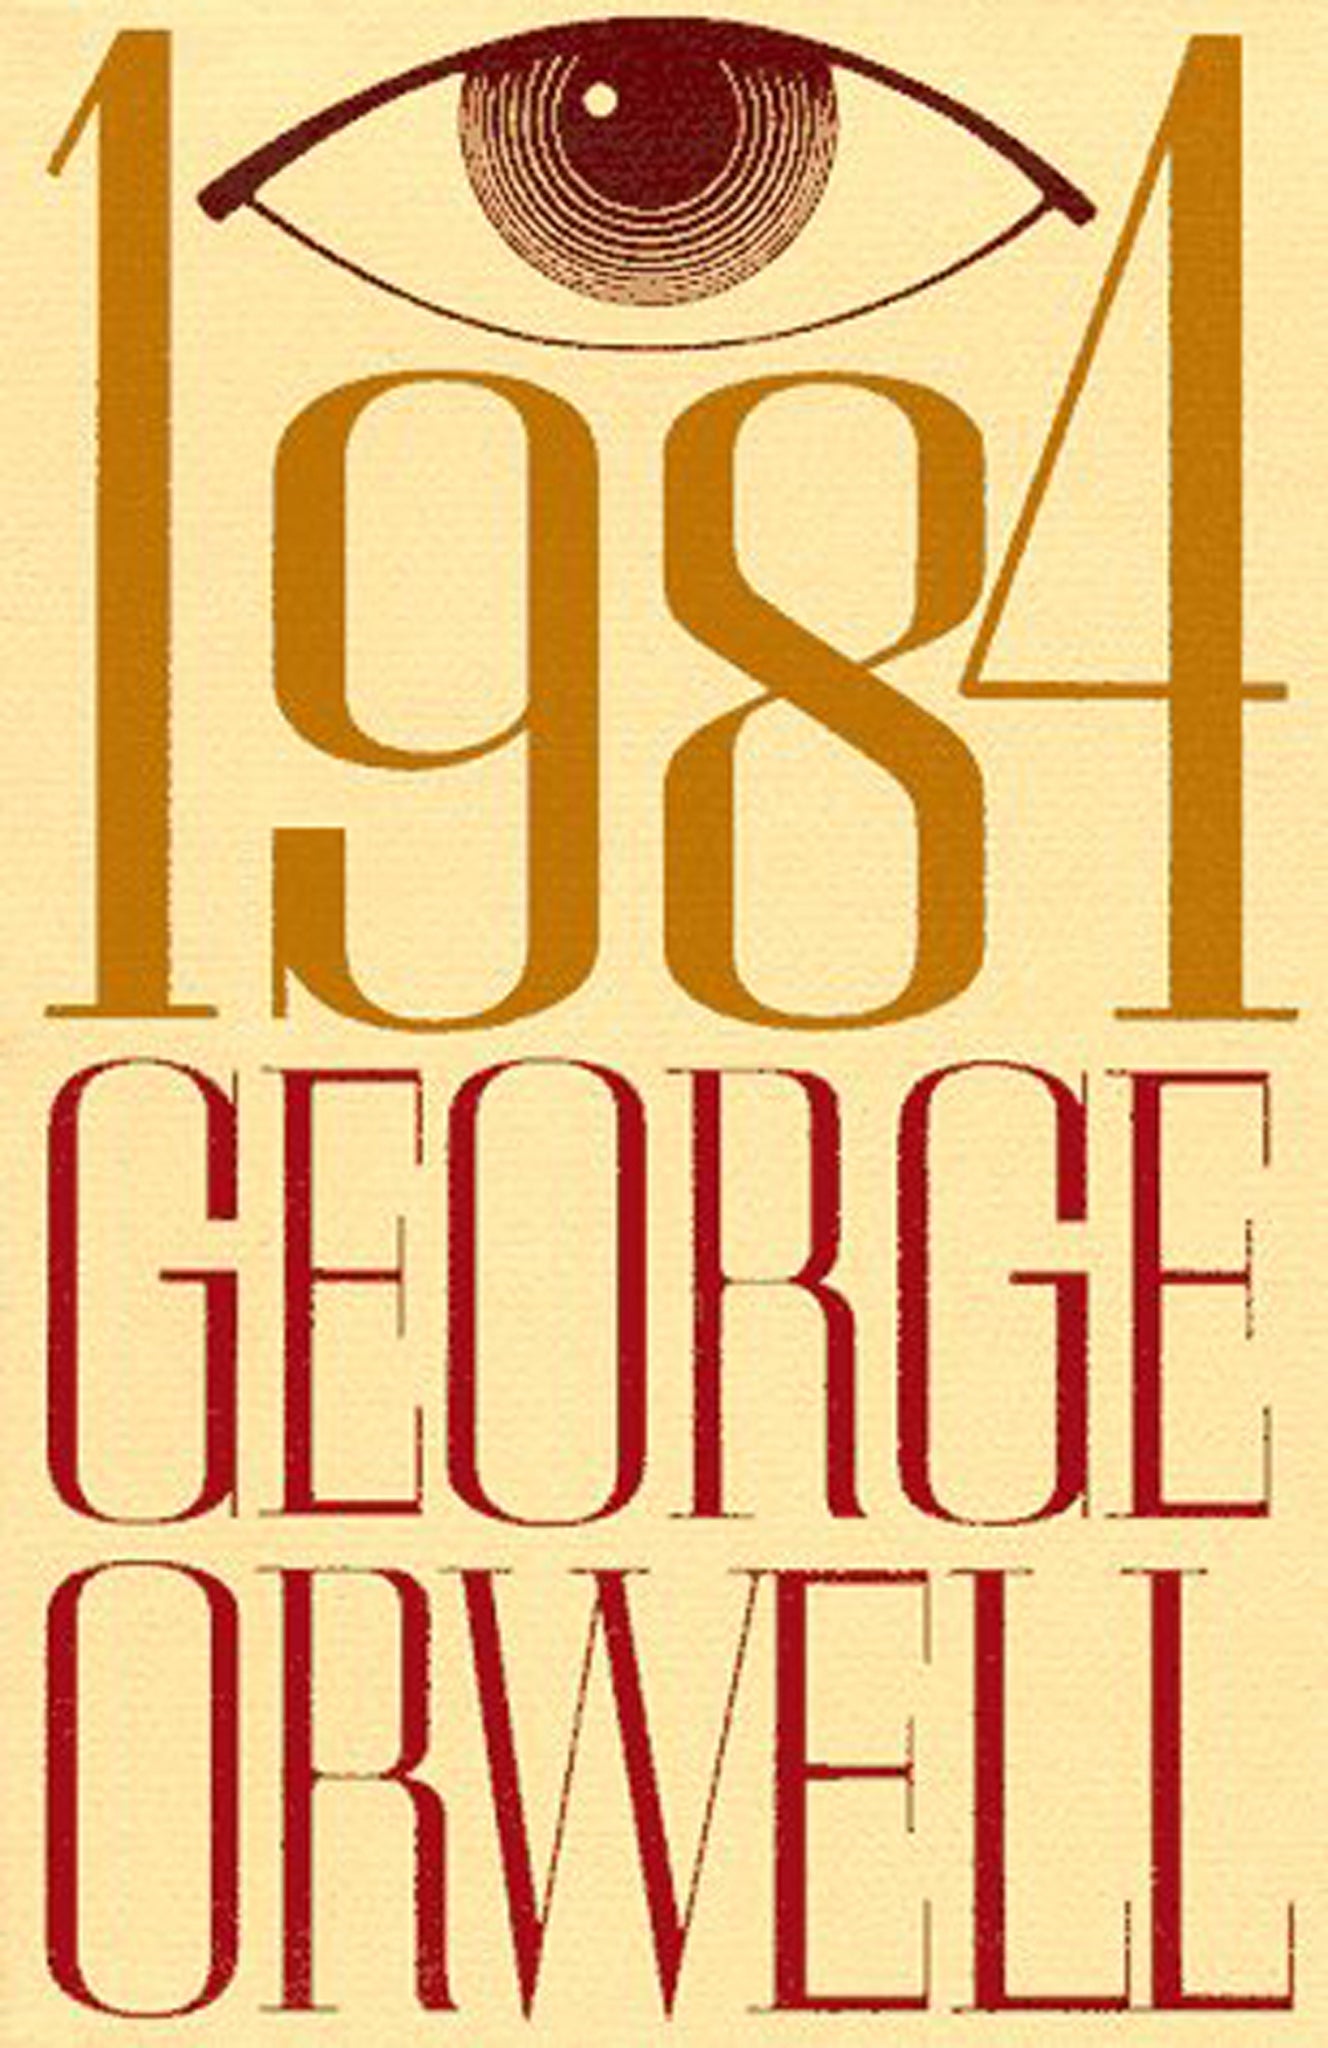 David Bowie's favourite books: George Orwell, 1984